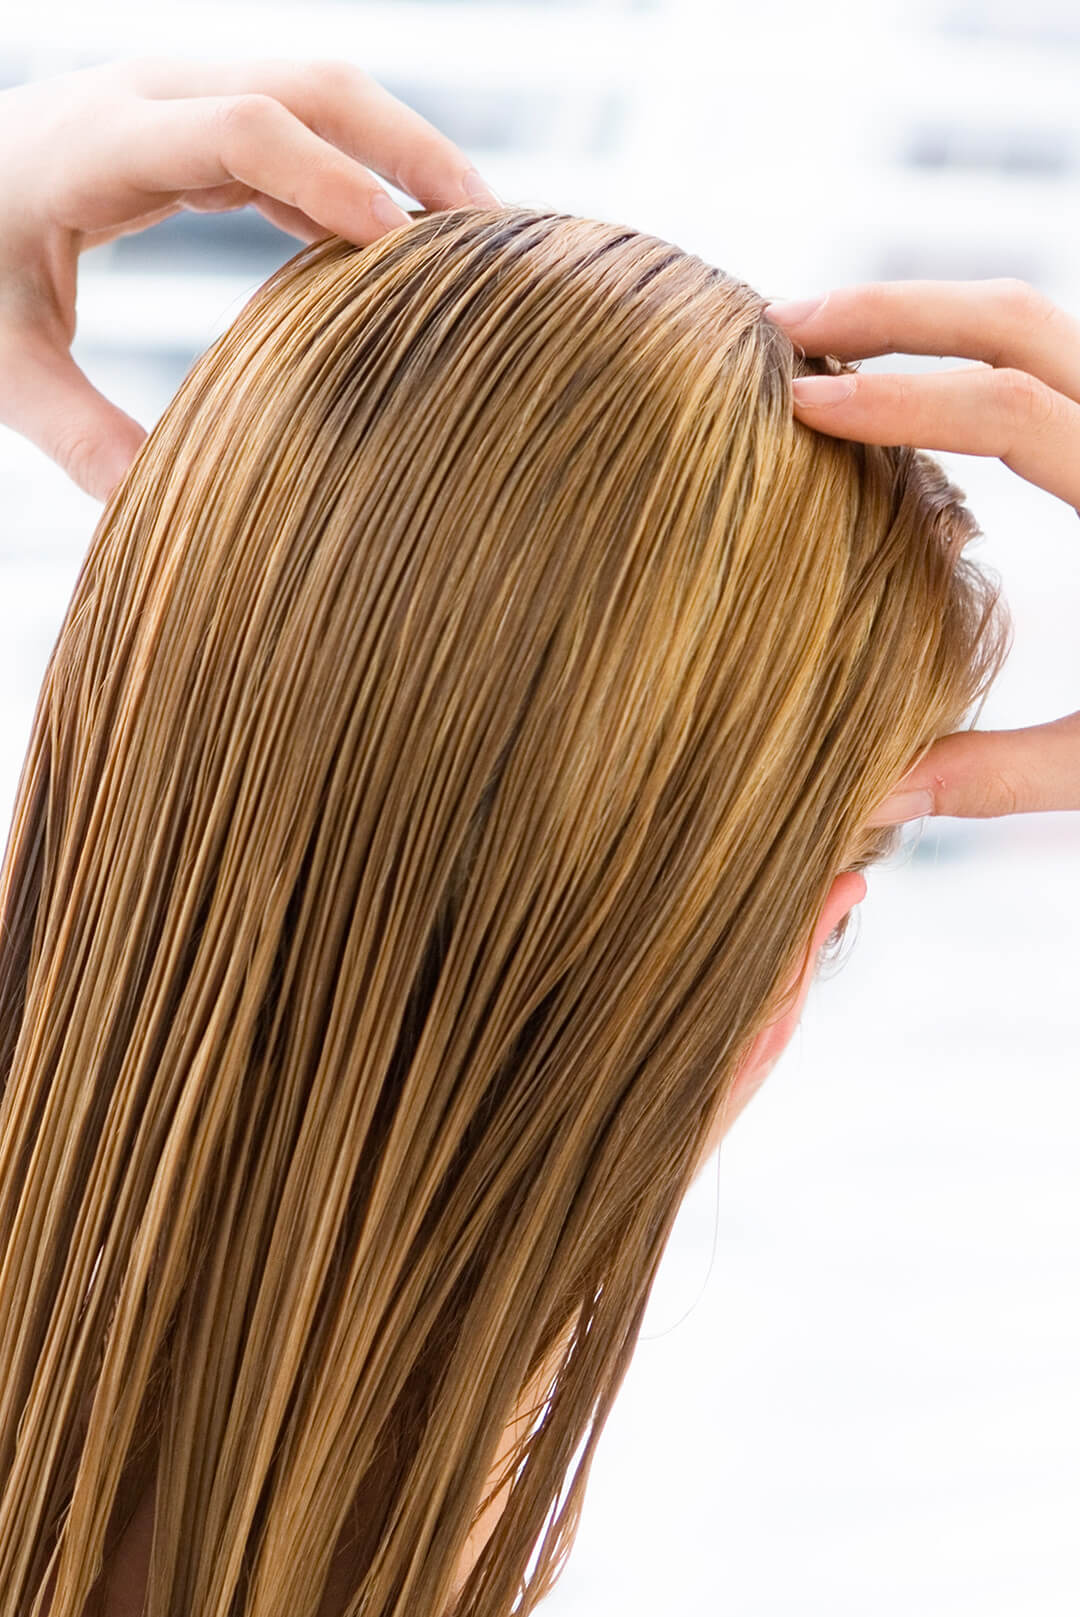 5 Steps To Prepare Your Hair For Color